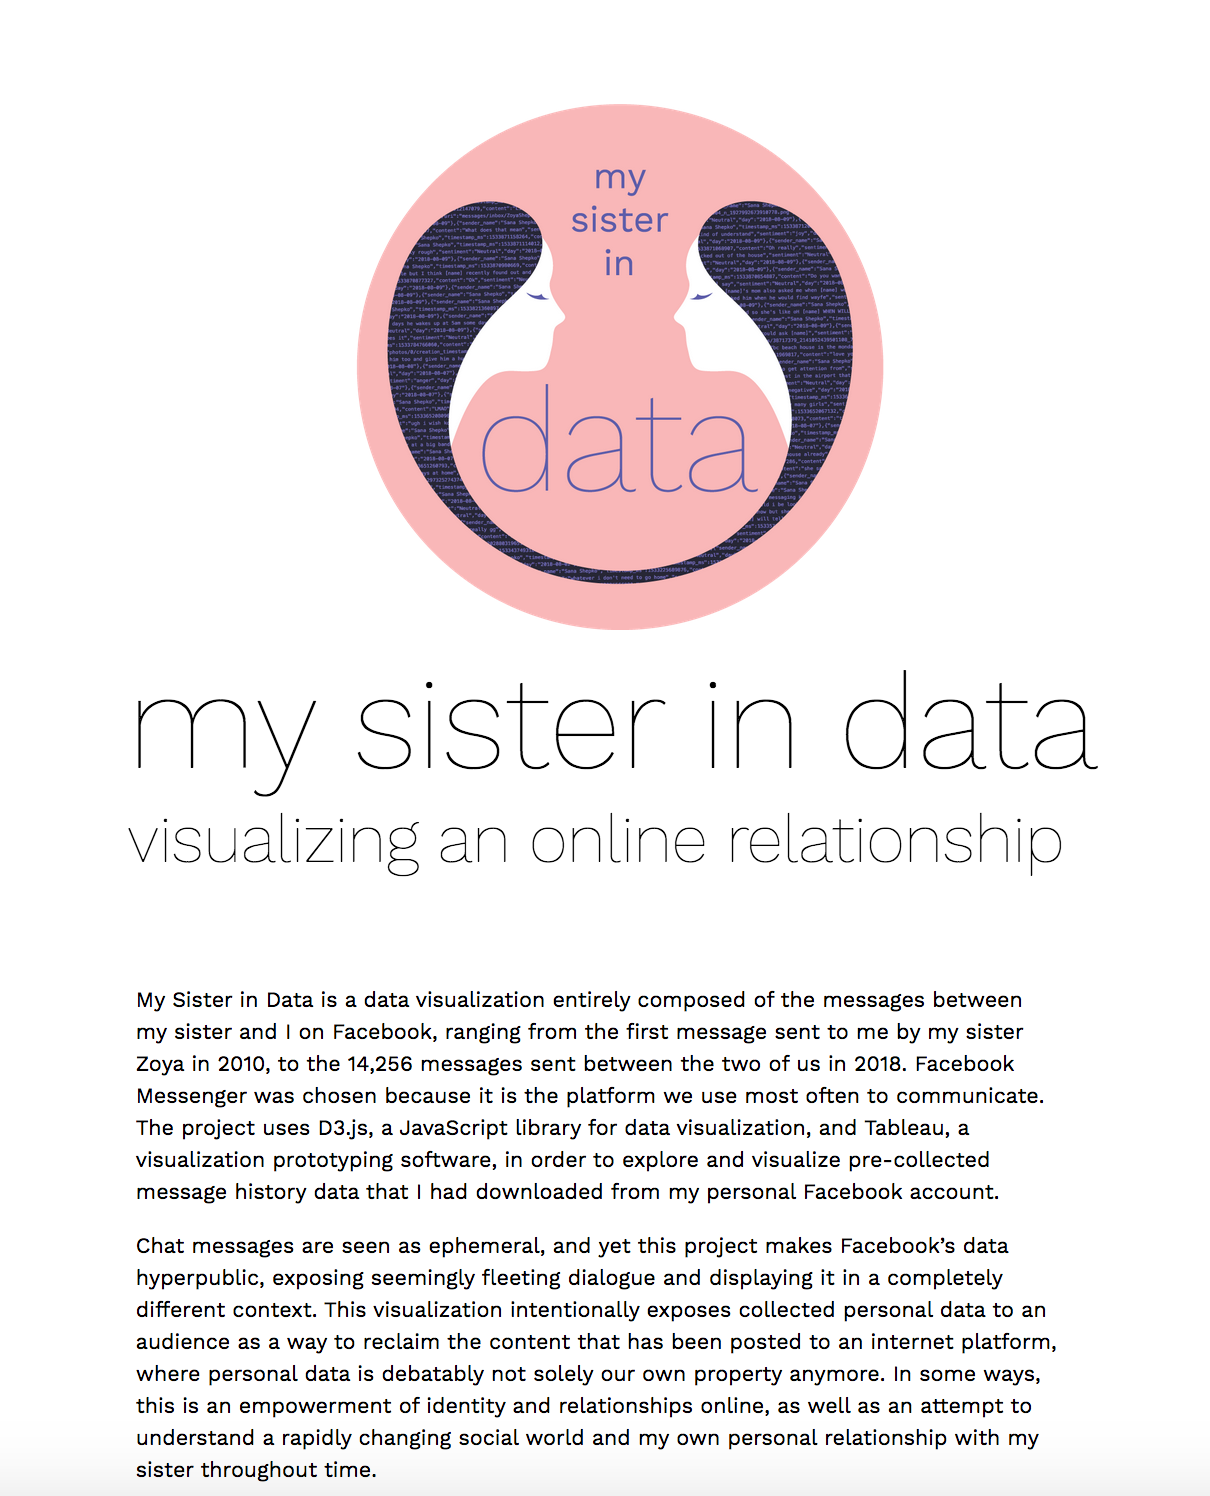 My Sister in Data: Visualizing an online relationship